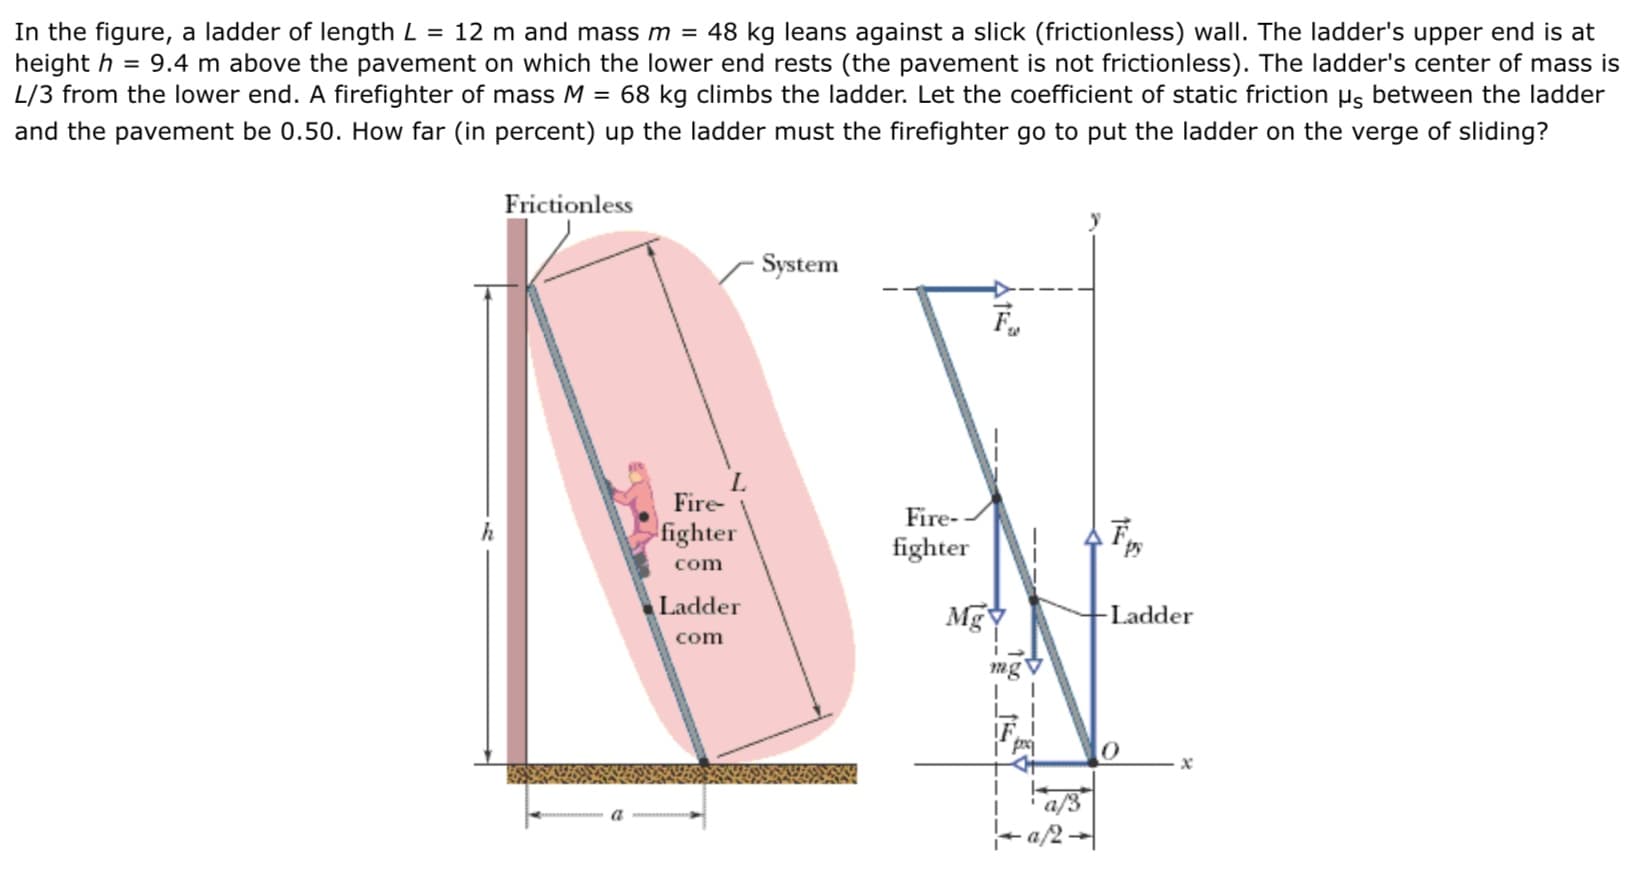 In the figure, a ladder of length L = 12 m and mass m = 48 kg leans against a slick (frictionless) wall. The ladder's upper end is at
height h = 9.4 m above the pavement on which the lower end rests (the pavement is not frictionless). The ladder's center of mass is
L/3 from the lower end. A firefighter of mass M = 68 kg climbs the ladder. Let the coefficient of static friction s between the ladder
and the pavement be 0.50. How far (in percent) up the ladder must the firefighter go to put the ladder on the verge of sliding?
Frictionless
System
Fire-
Fire-
fighter
fighter
com
Ladder
Mg
Ladder
com
mg
a/3
